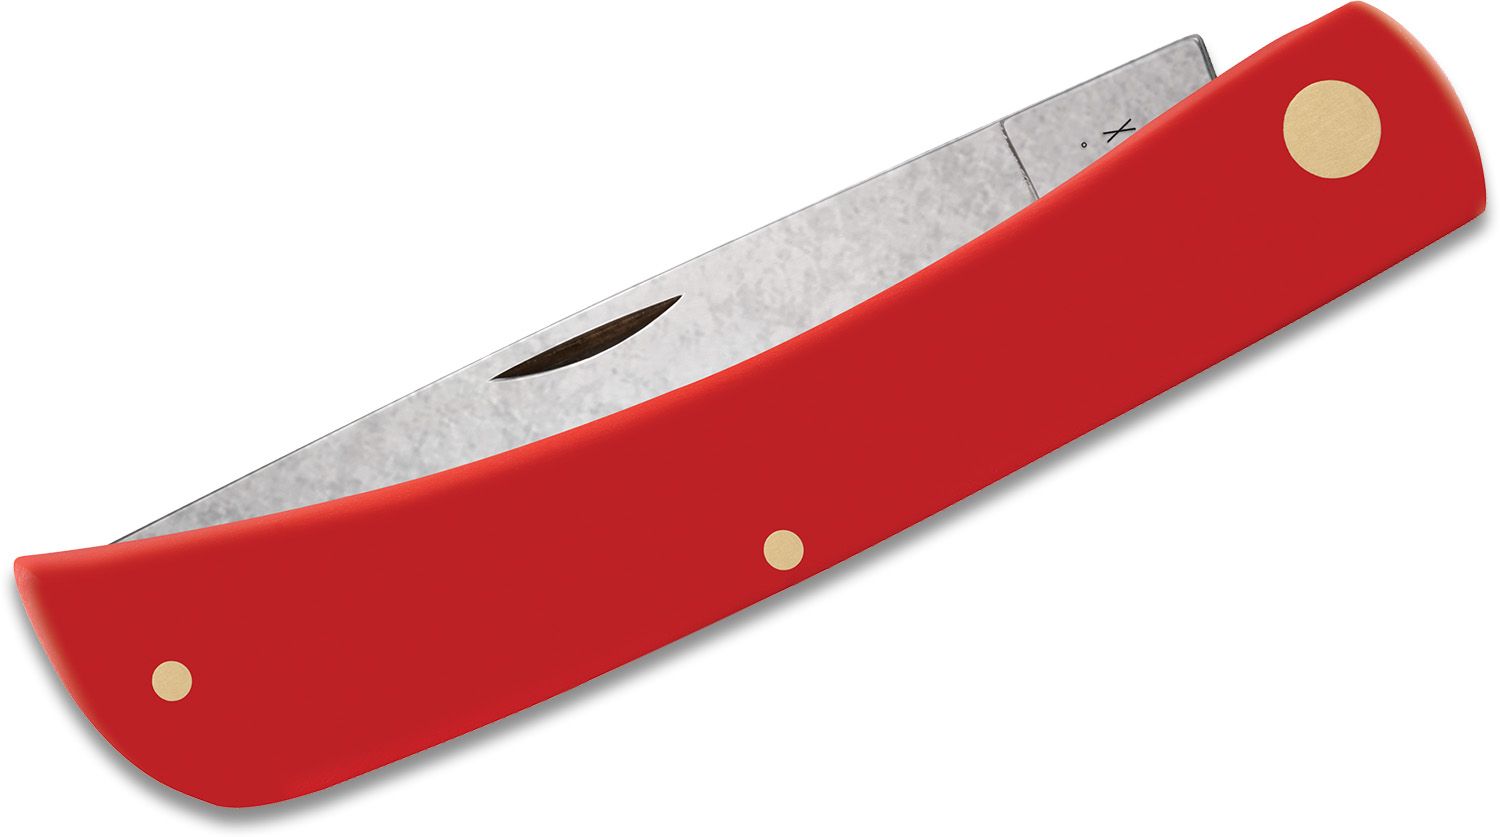 CASE XX WR POCKET KNIFE SOD BUSTER - AMERICAN WORKMAN CS - SMOOTH RED  SYNTHETIC, ITEM 73933, LENGTH CLOSED 4 5/8 INCH (4138 CS) : Sports &  Outdoors, brand sodbuster knife 